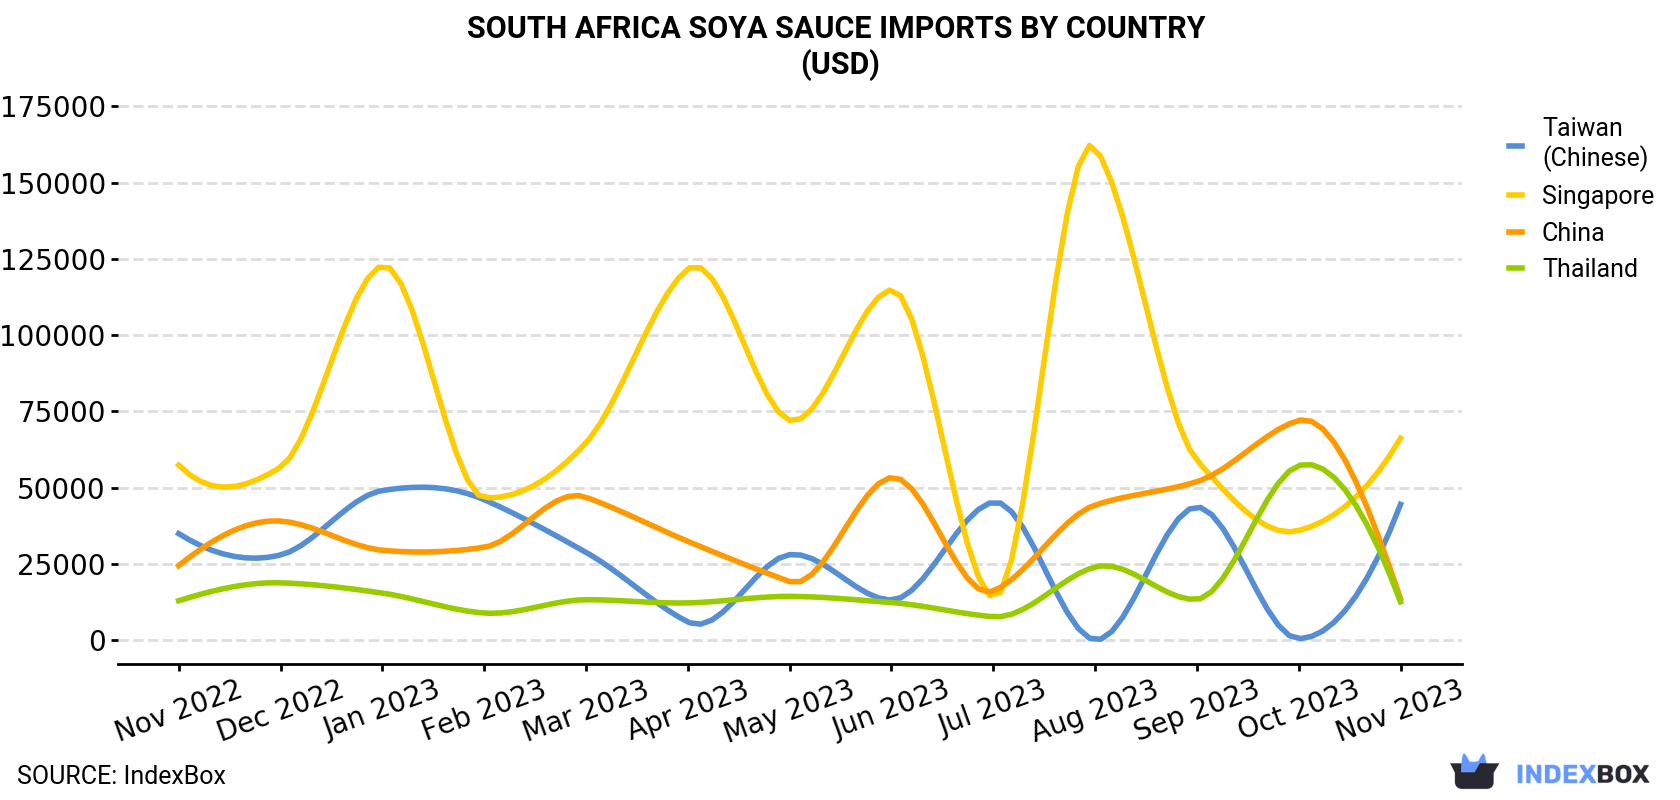 South Africa Soya Sauce Imports By Country (USD)